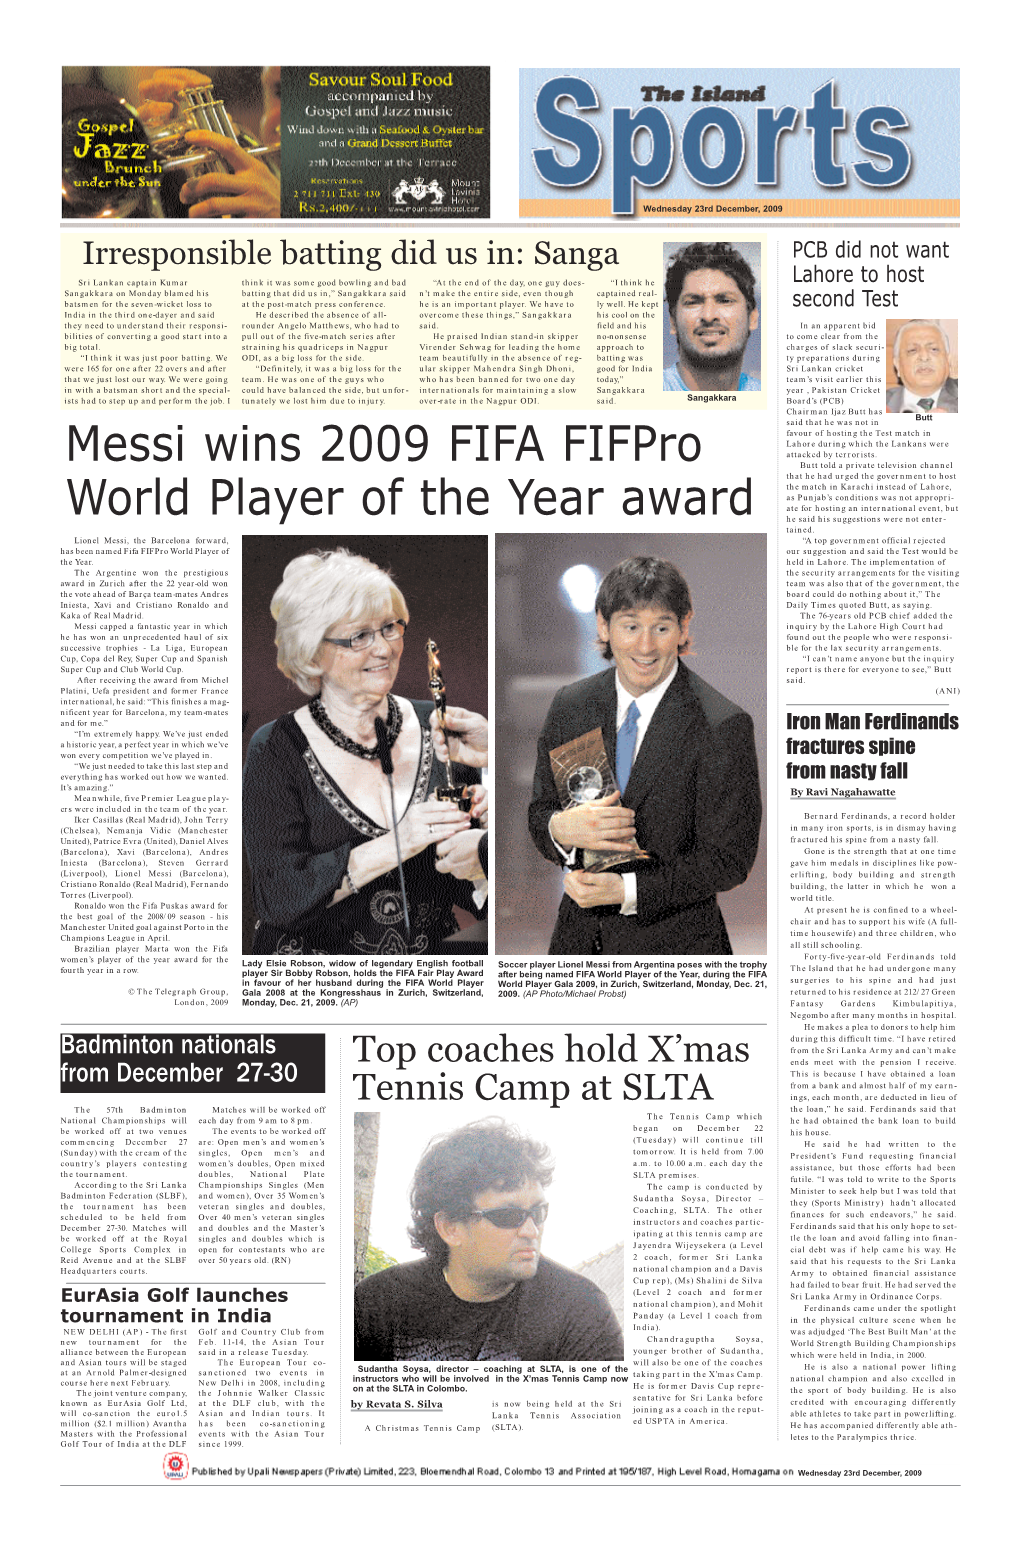 Messi Wins 2009 FIFA Fifpro World Player of the Year Award